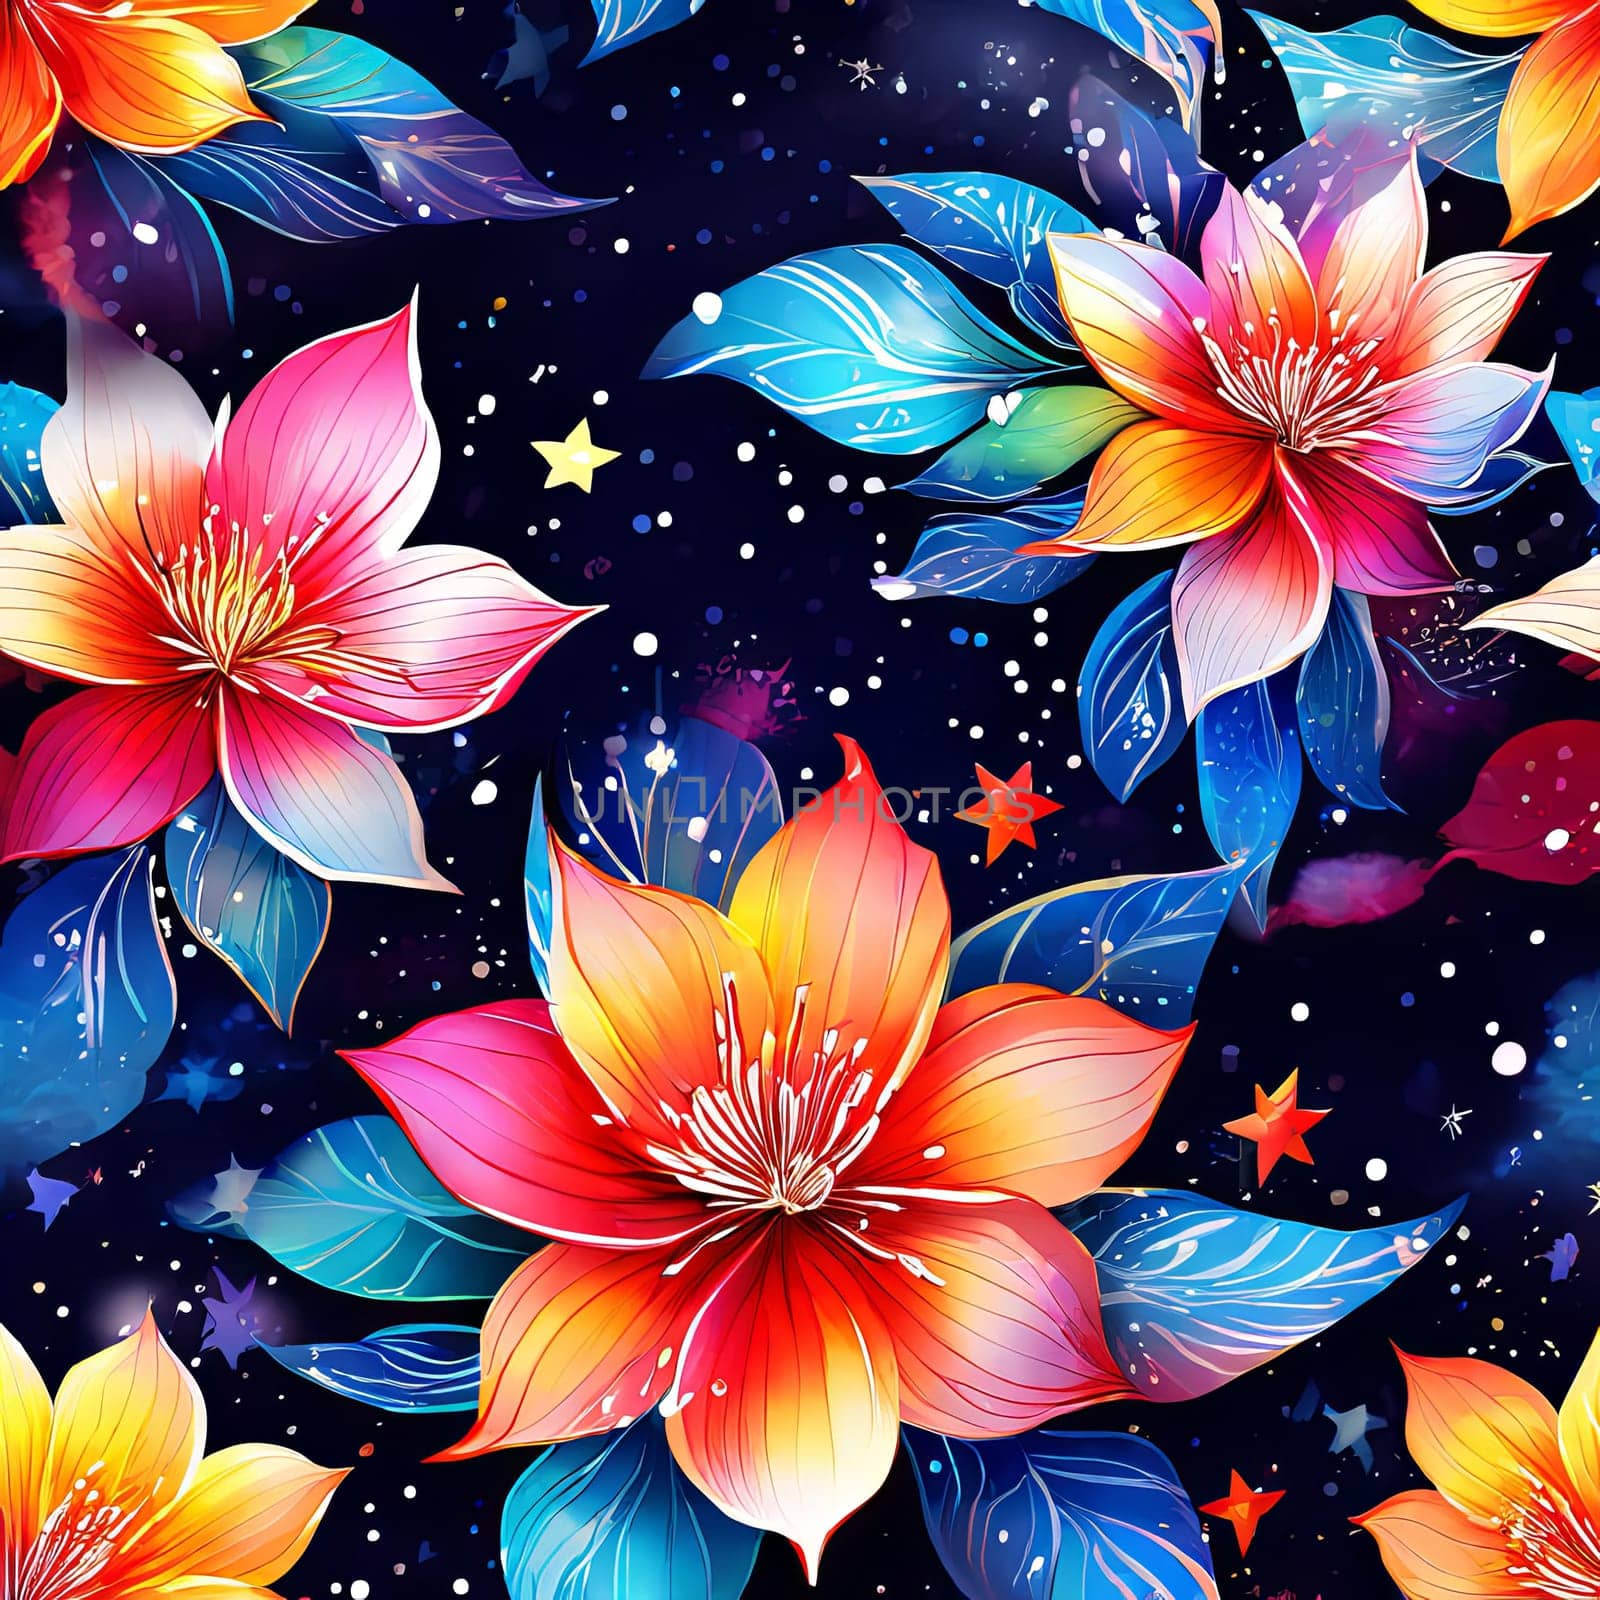 Vibrant colorful flowers set against dark background. For meditation apps, on covers of books about spiritual growth, in designs for yoga studios, spa salons, illustration for articles on inner peace. by Angelsmoon